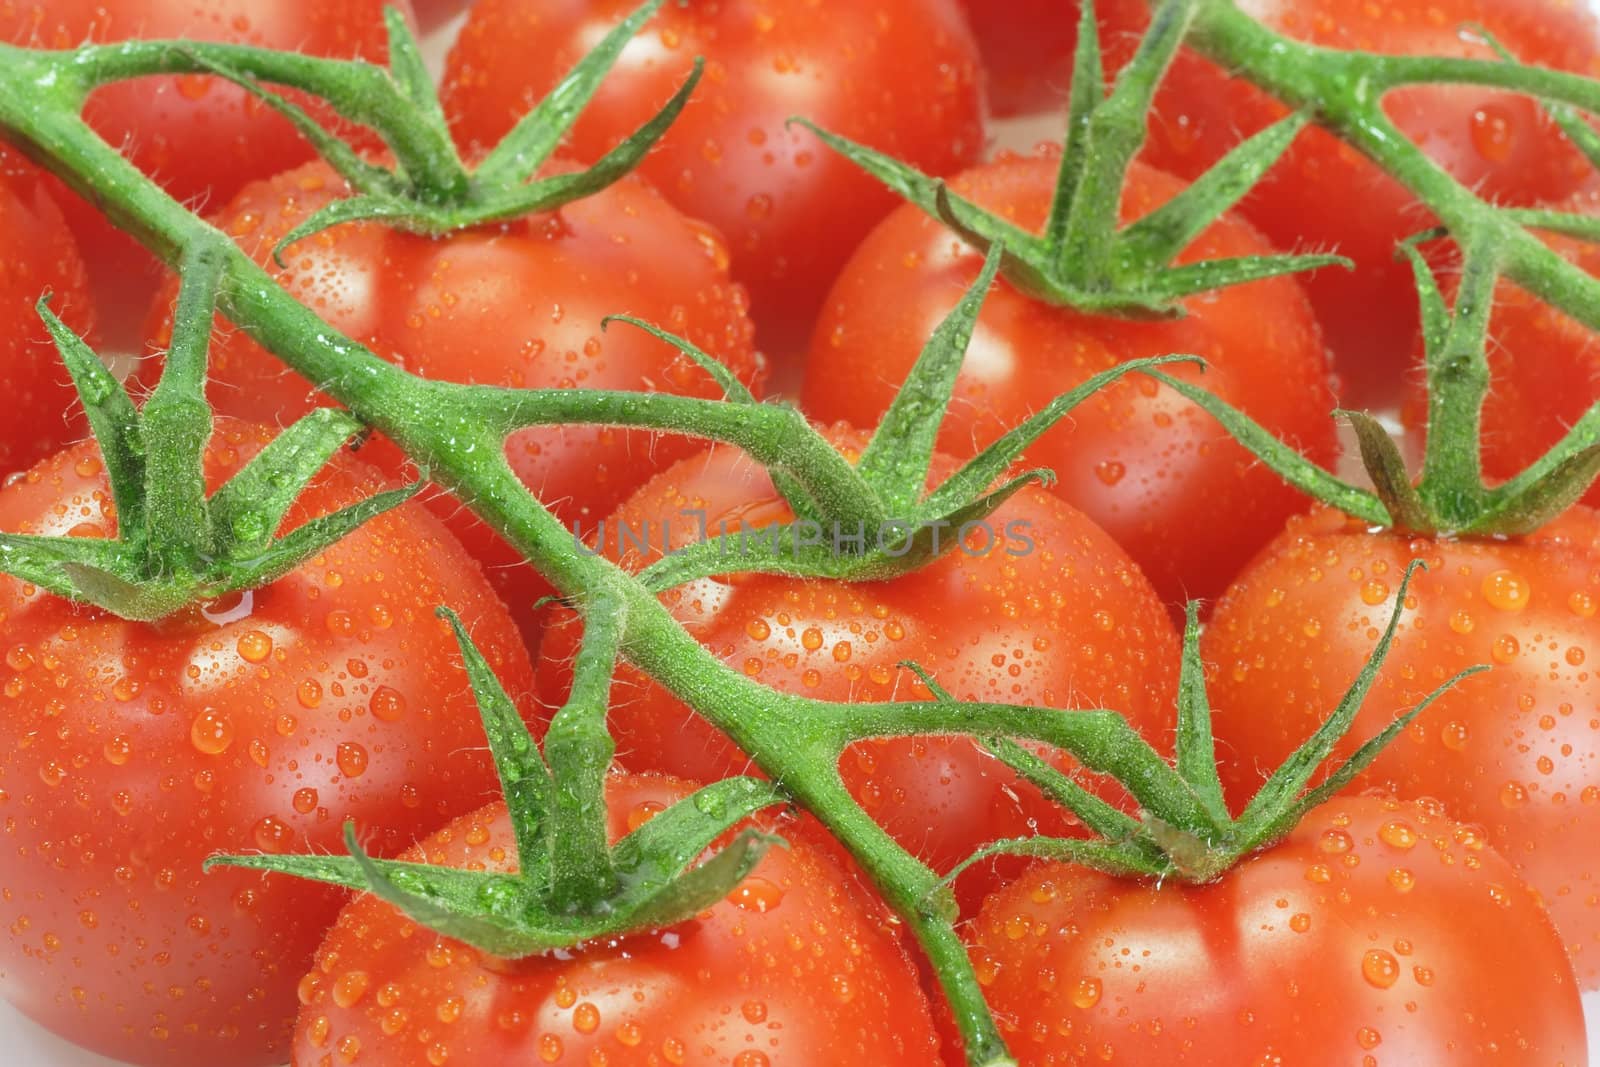 Tomatoes by Teamarbeit